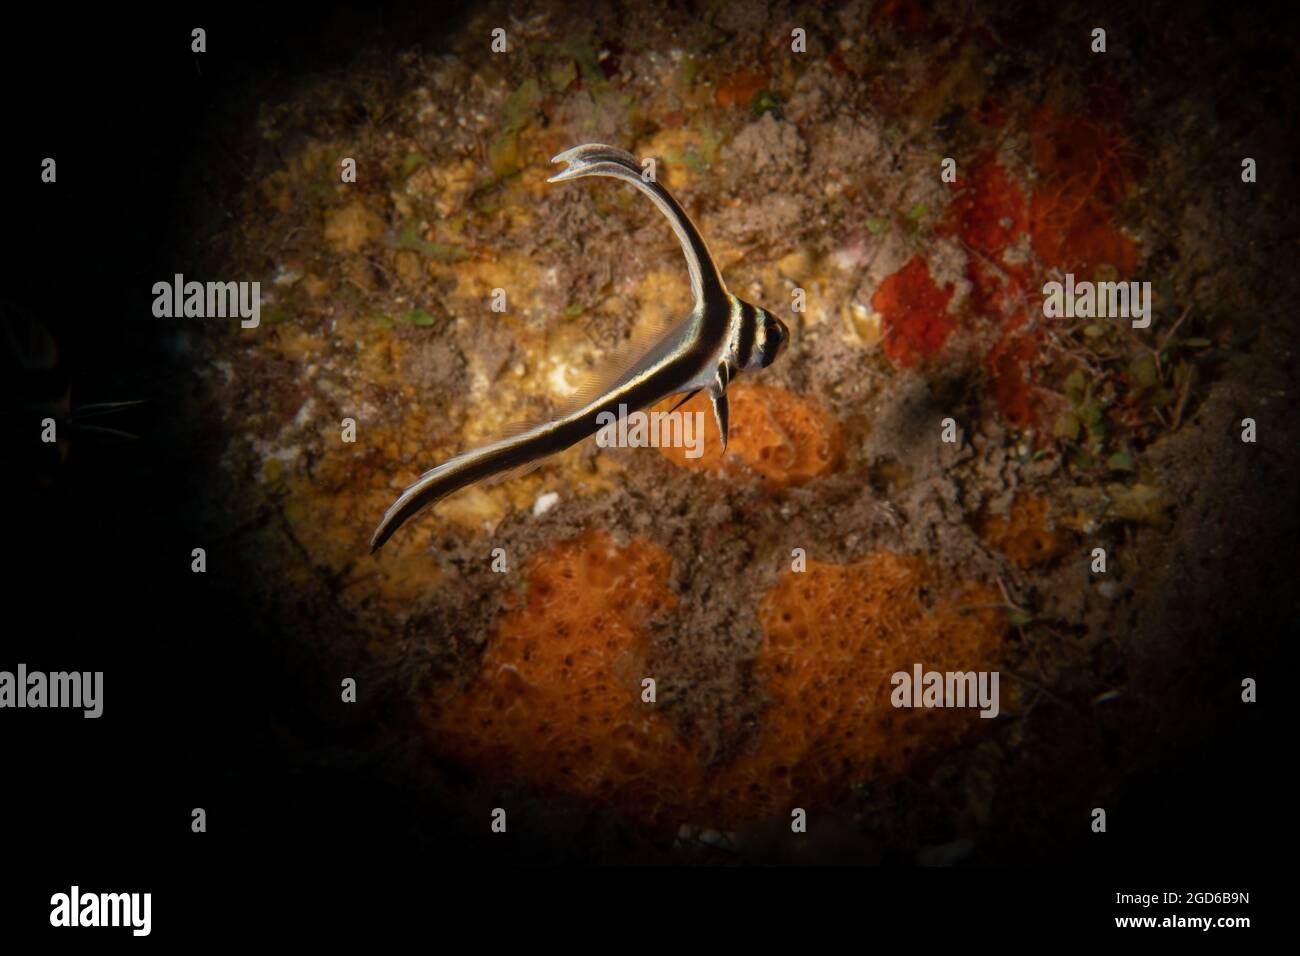 Juvenile Sotted Drum (Equetus punctatus) on the reef off the island of Saba, Dutch Caribbean. Stock Photo